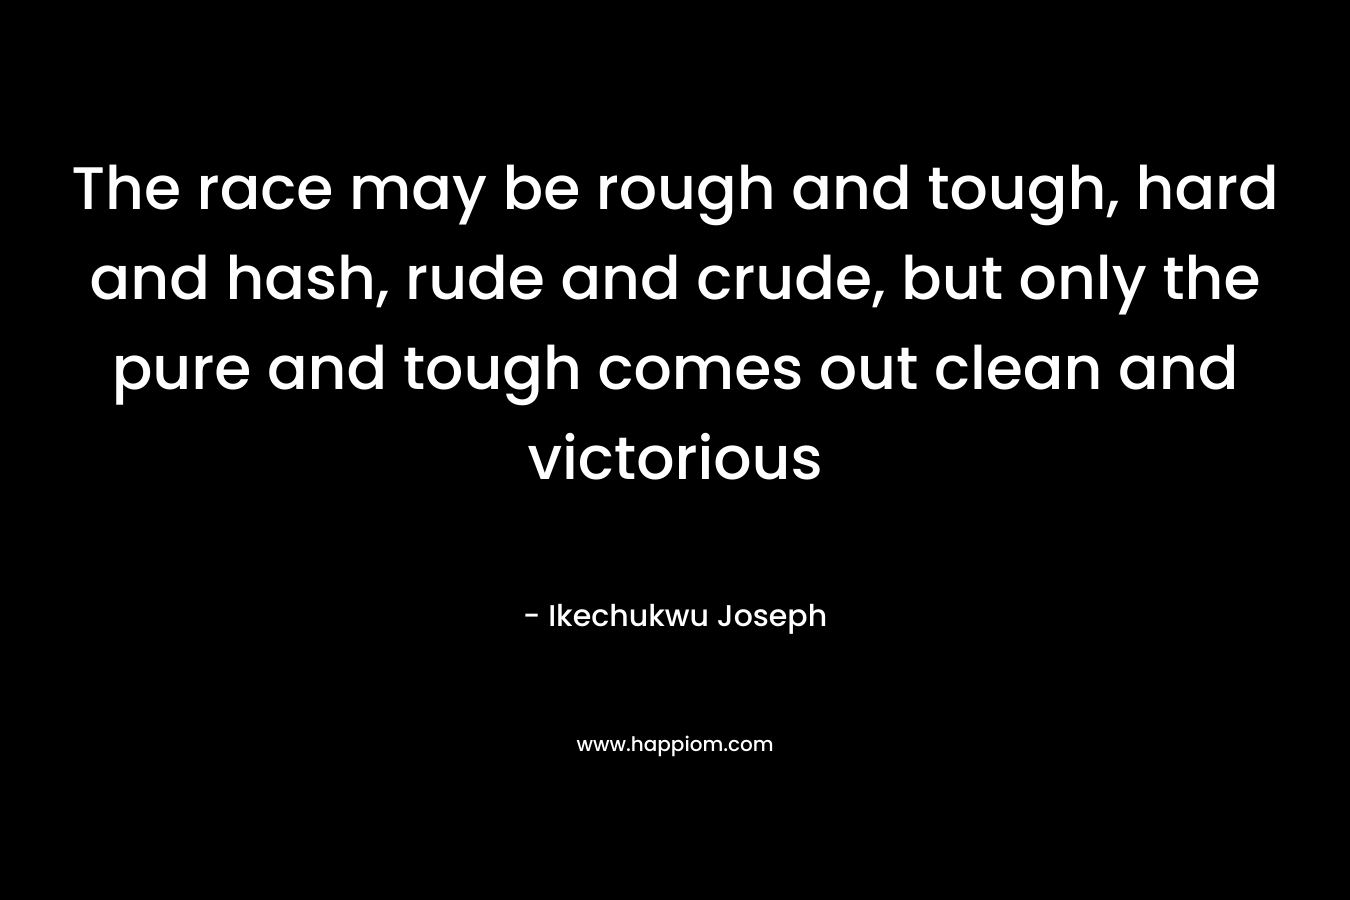 The race may be rough and tough, hard and hash, rude and crude, but only the pure and tough comes out clean and victorious – Ikechukwu Joseph